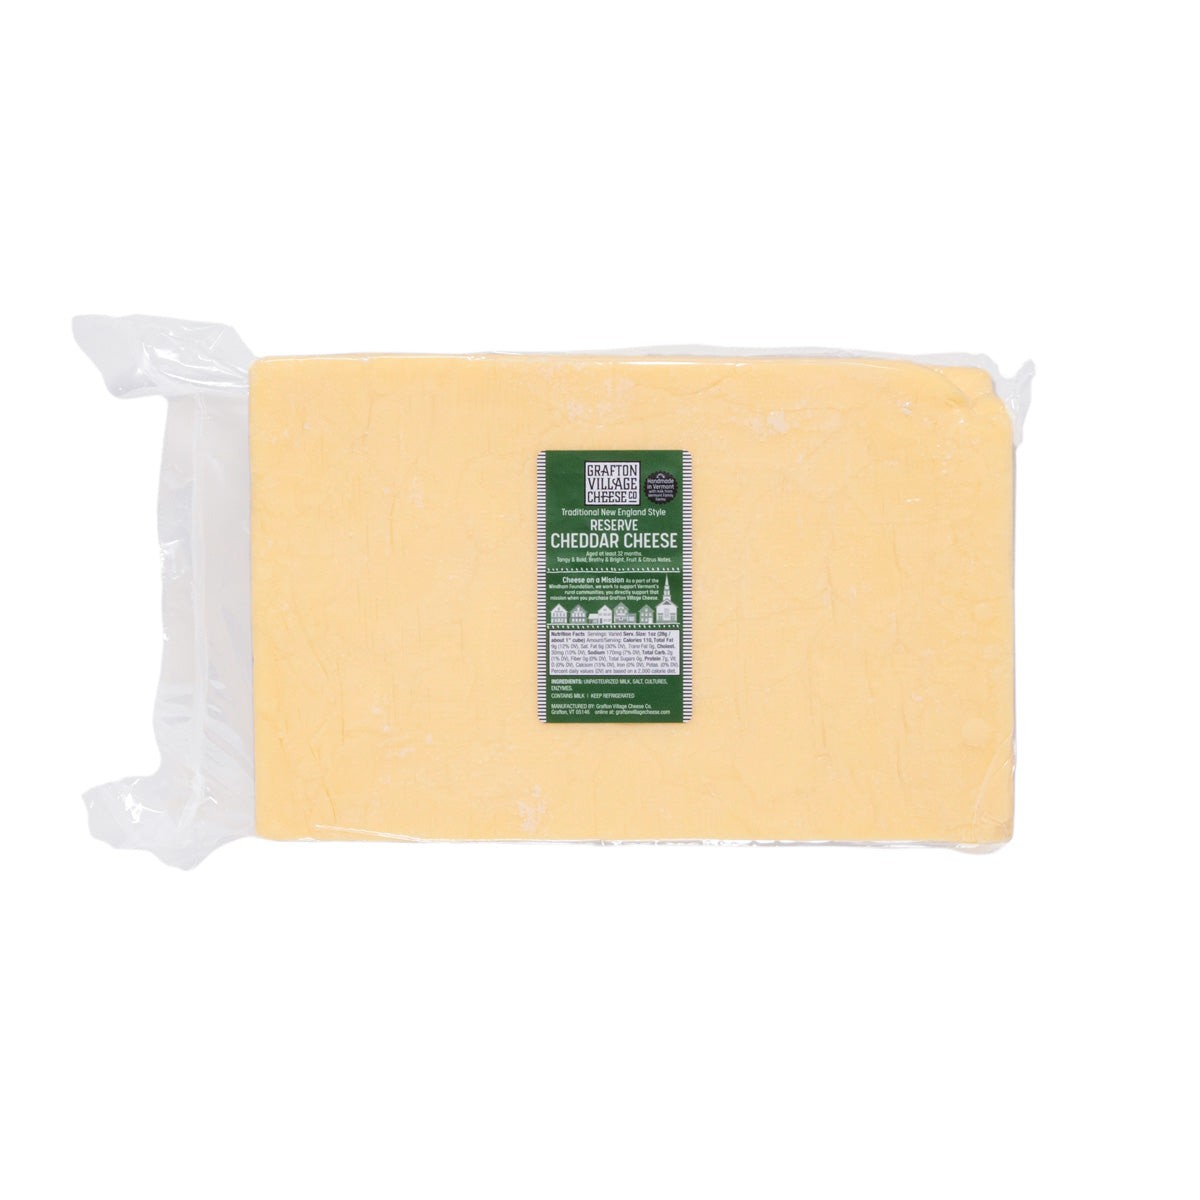 Grafton Village Cheese Reserve Cheddar Aged 2.5 Years